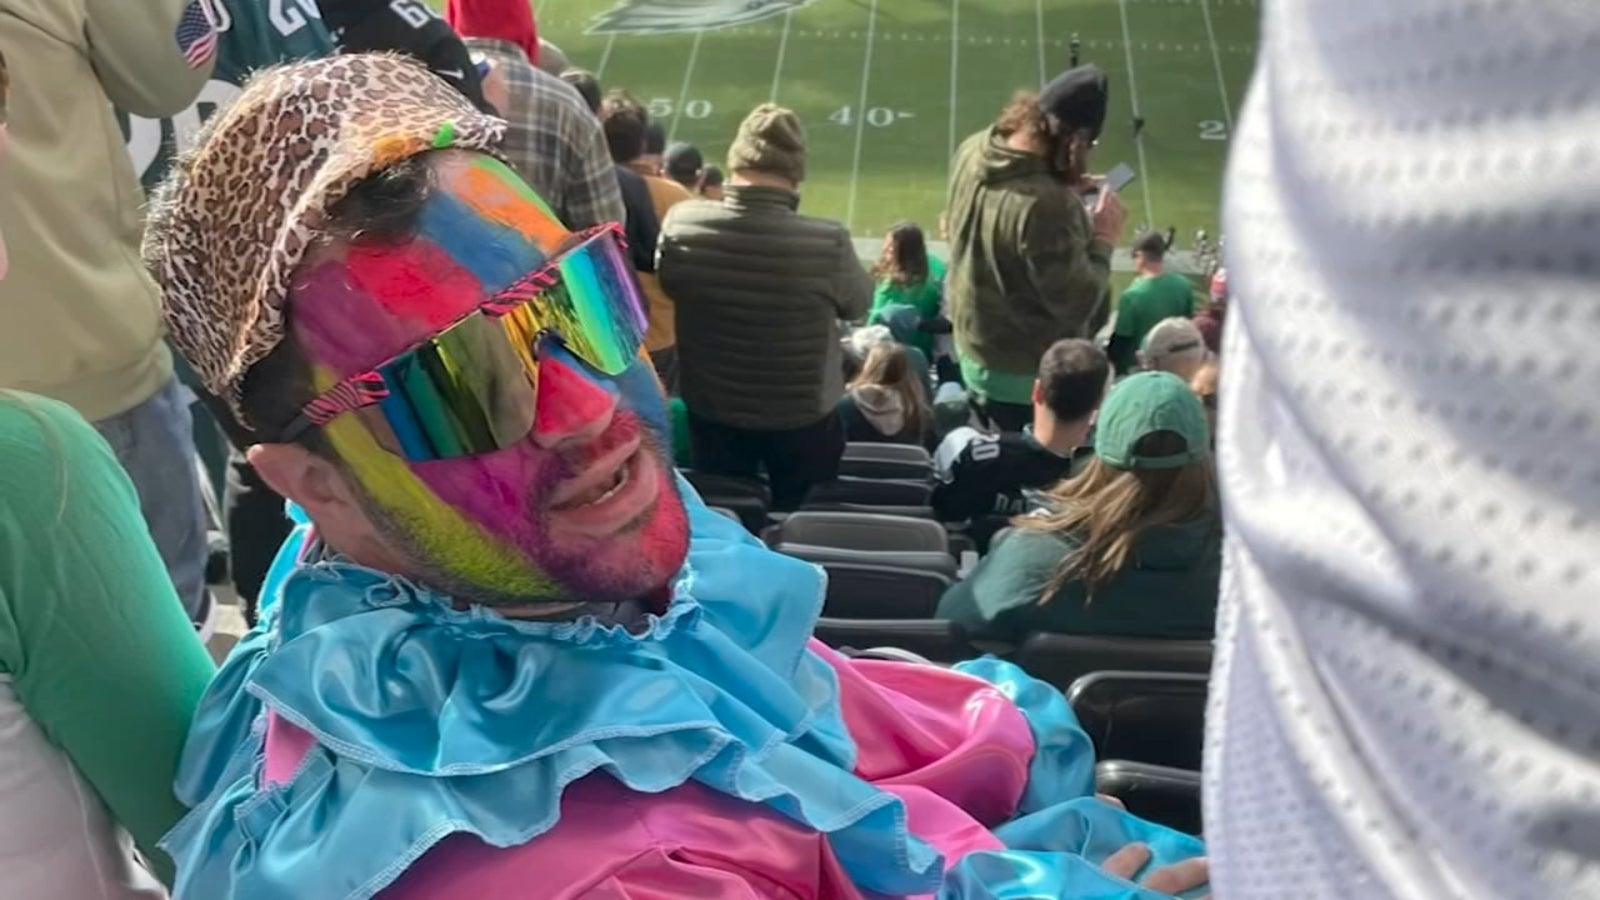 Doctor in Mummers costume helps save man's life during Eagles game